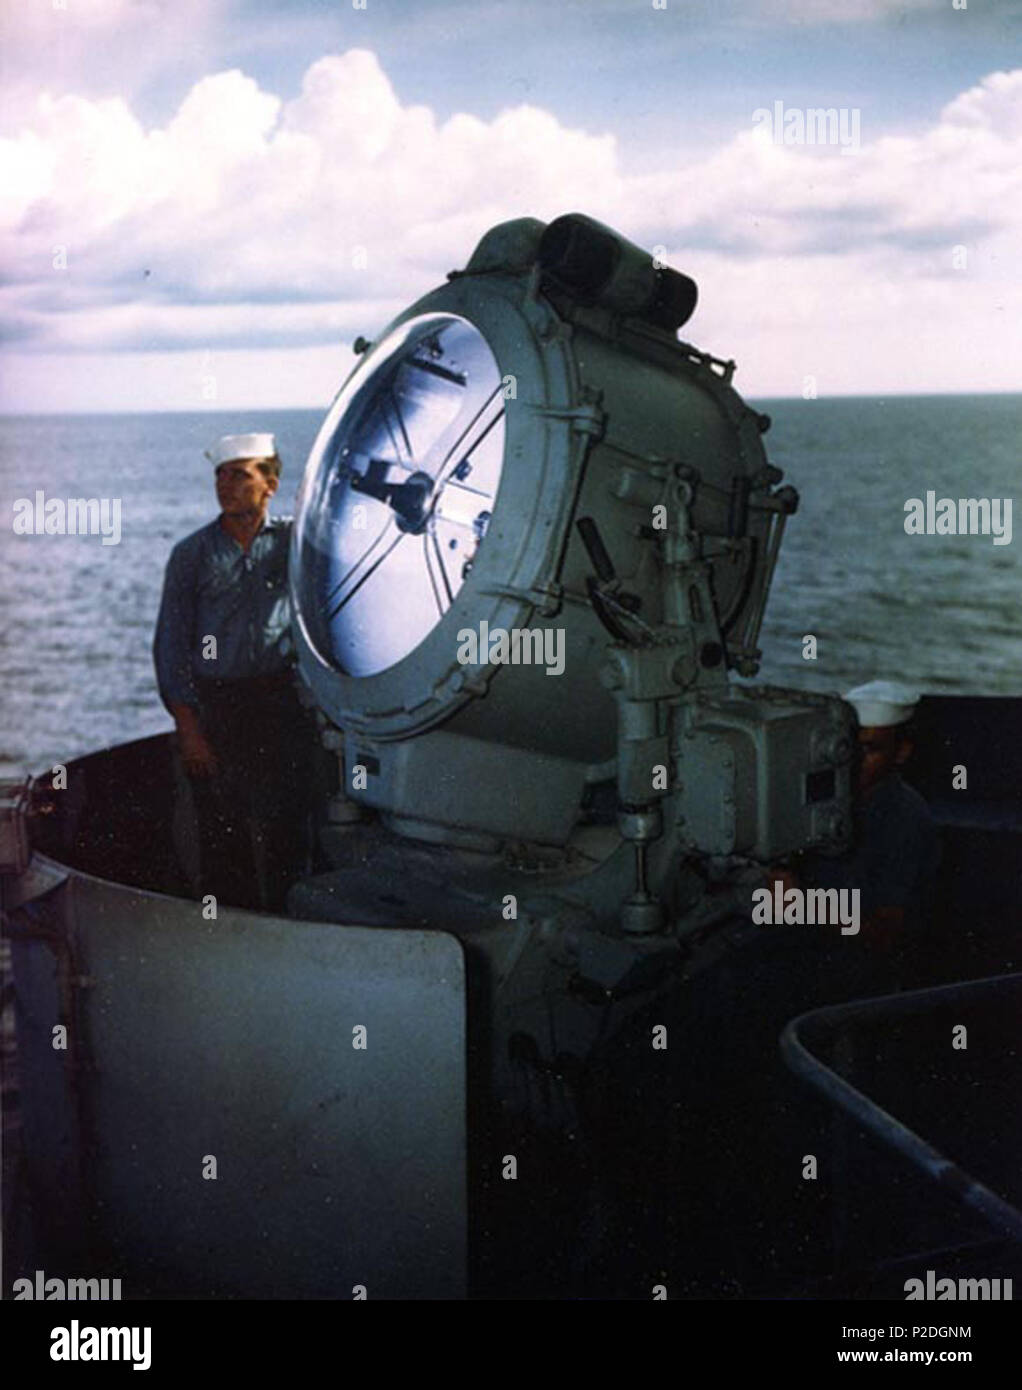 . U.S. Electricians's Mate First Class Kenneth McNally and Seaman First Class George Skiratko operate a 36-inch (91.4 cm) searchlight aboard the battleship USS Missouri (BB-63), during the ship's shakedown cruise, circa August 1944. circa August 1944. USN 51 Searchlight aboard USS Missouri (BB-63) 02 in 1944 Stock Photo